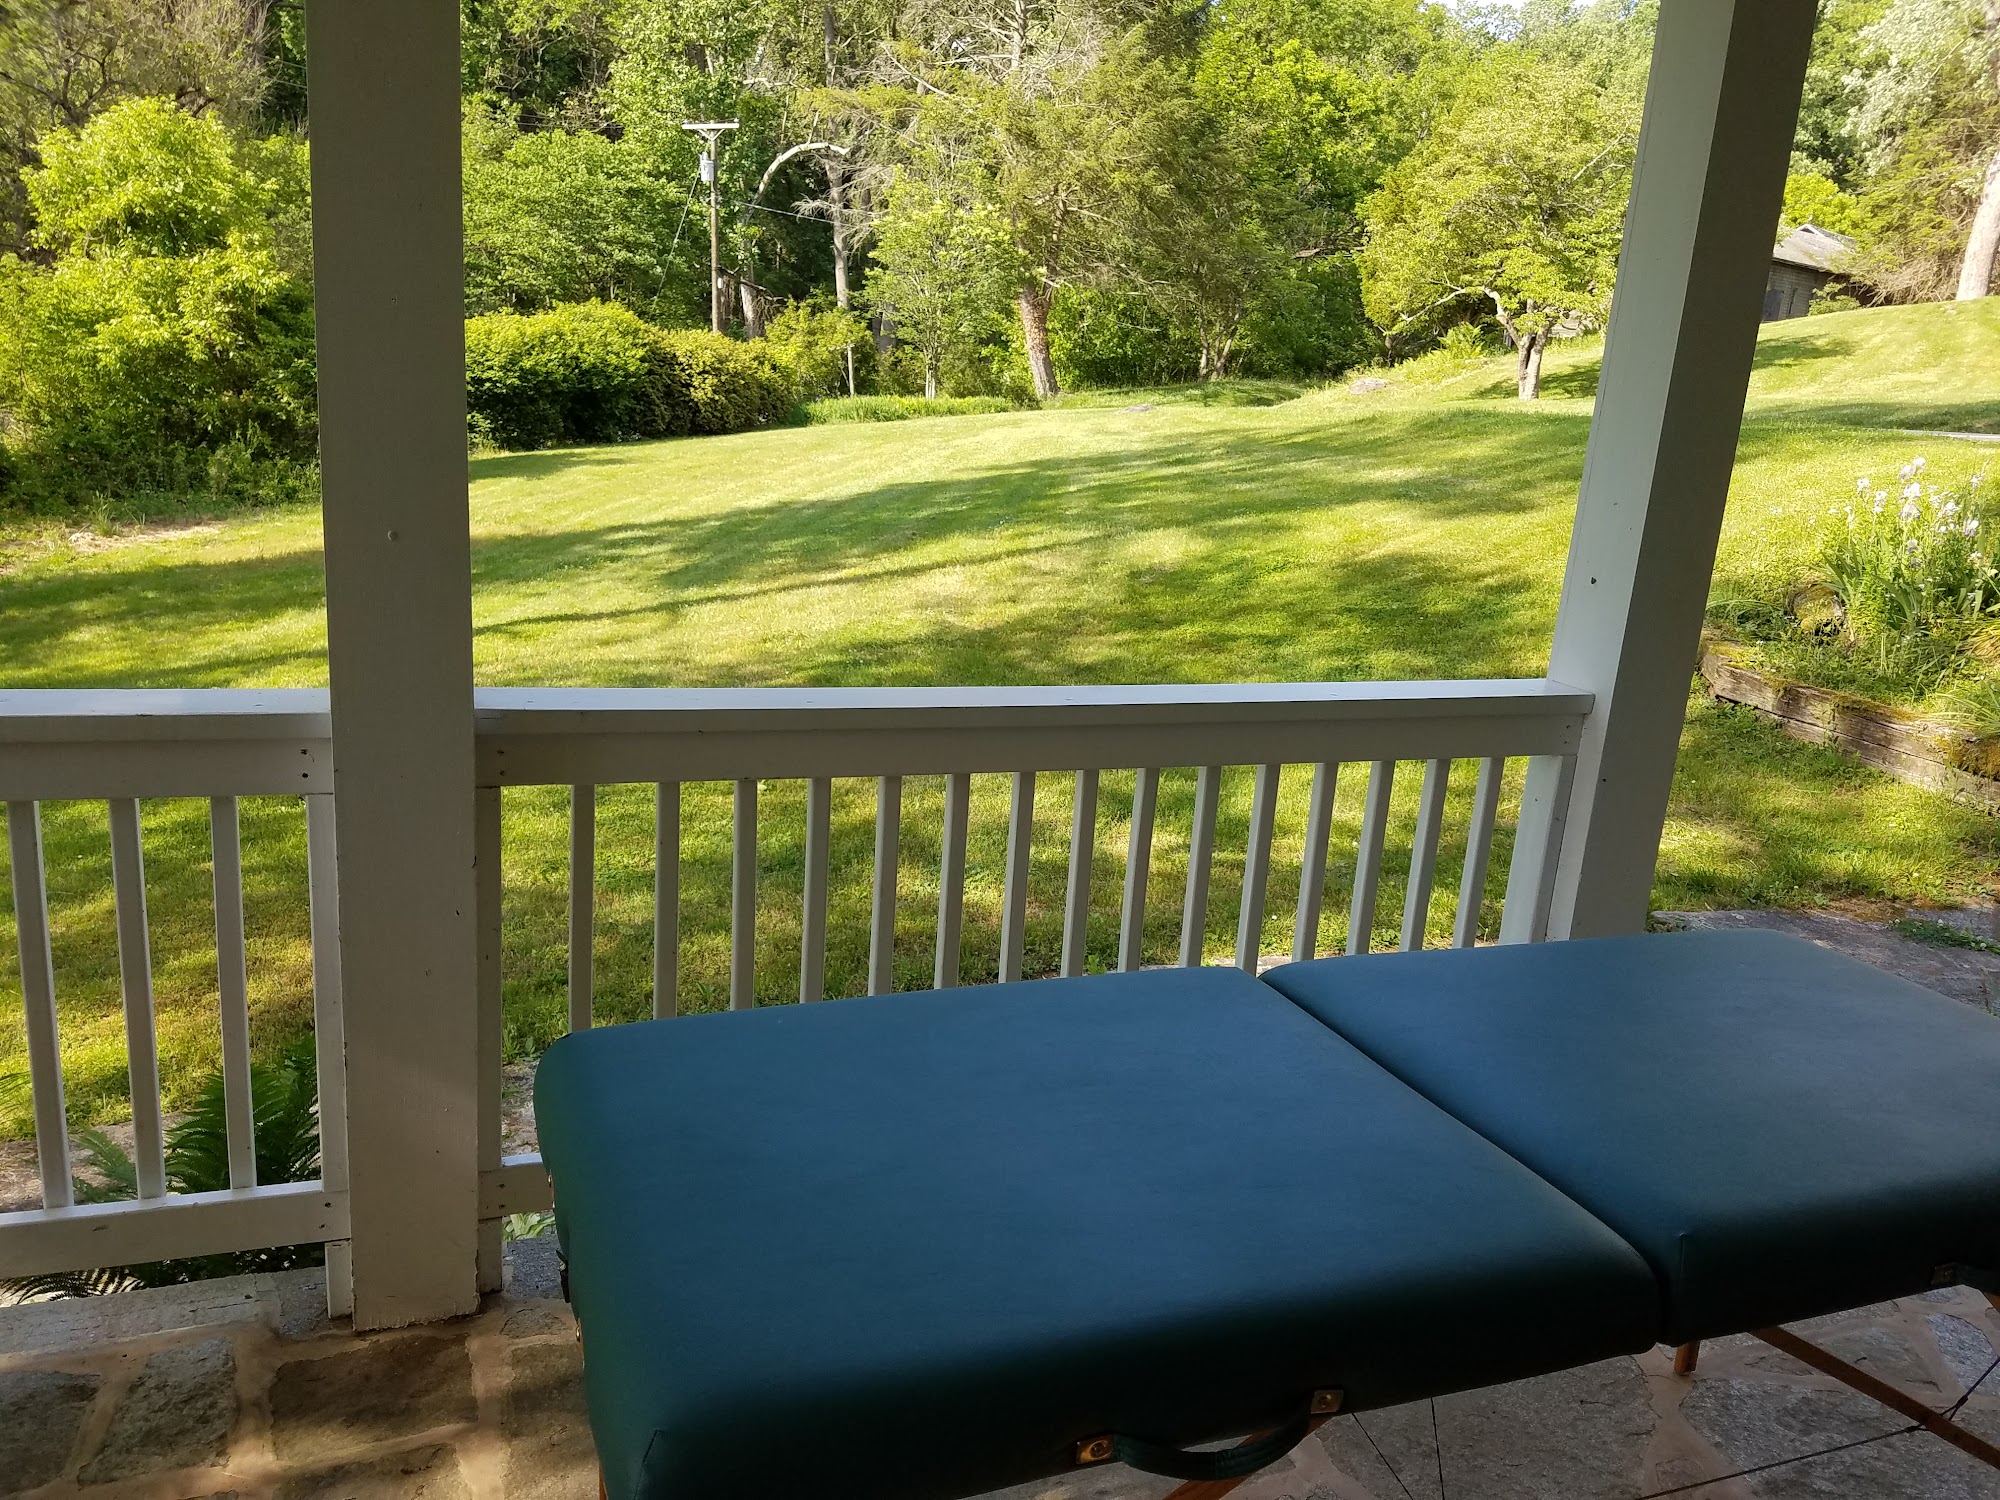 Therapeutic Massage by Susan Chalker 17112 York Rd, Parkton Maryland 21120